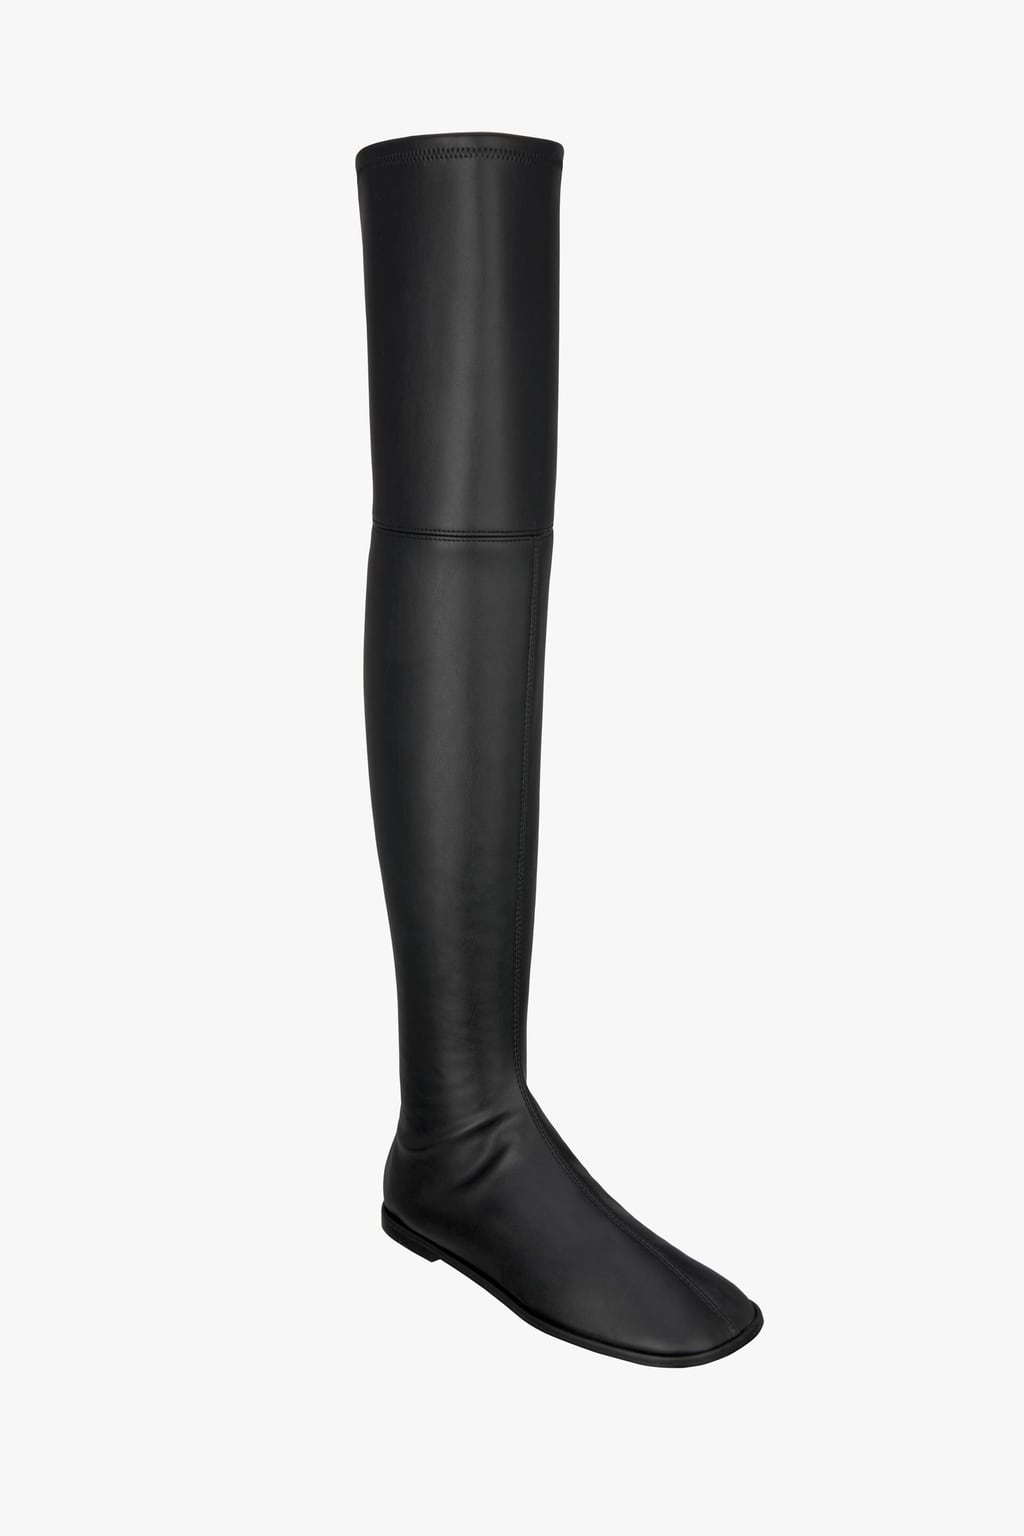 Zara Fitted Over The Knee Boots